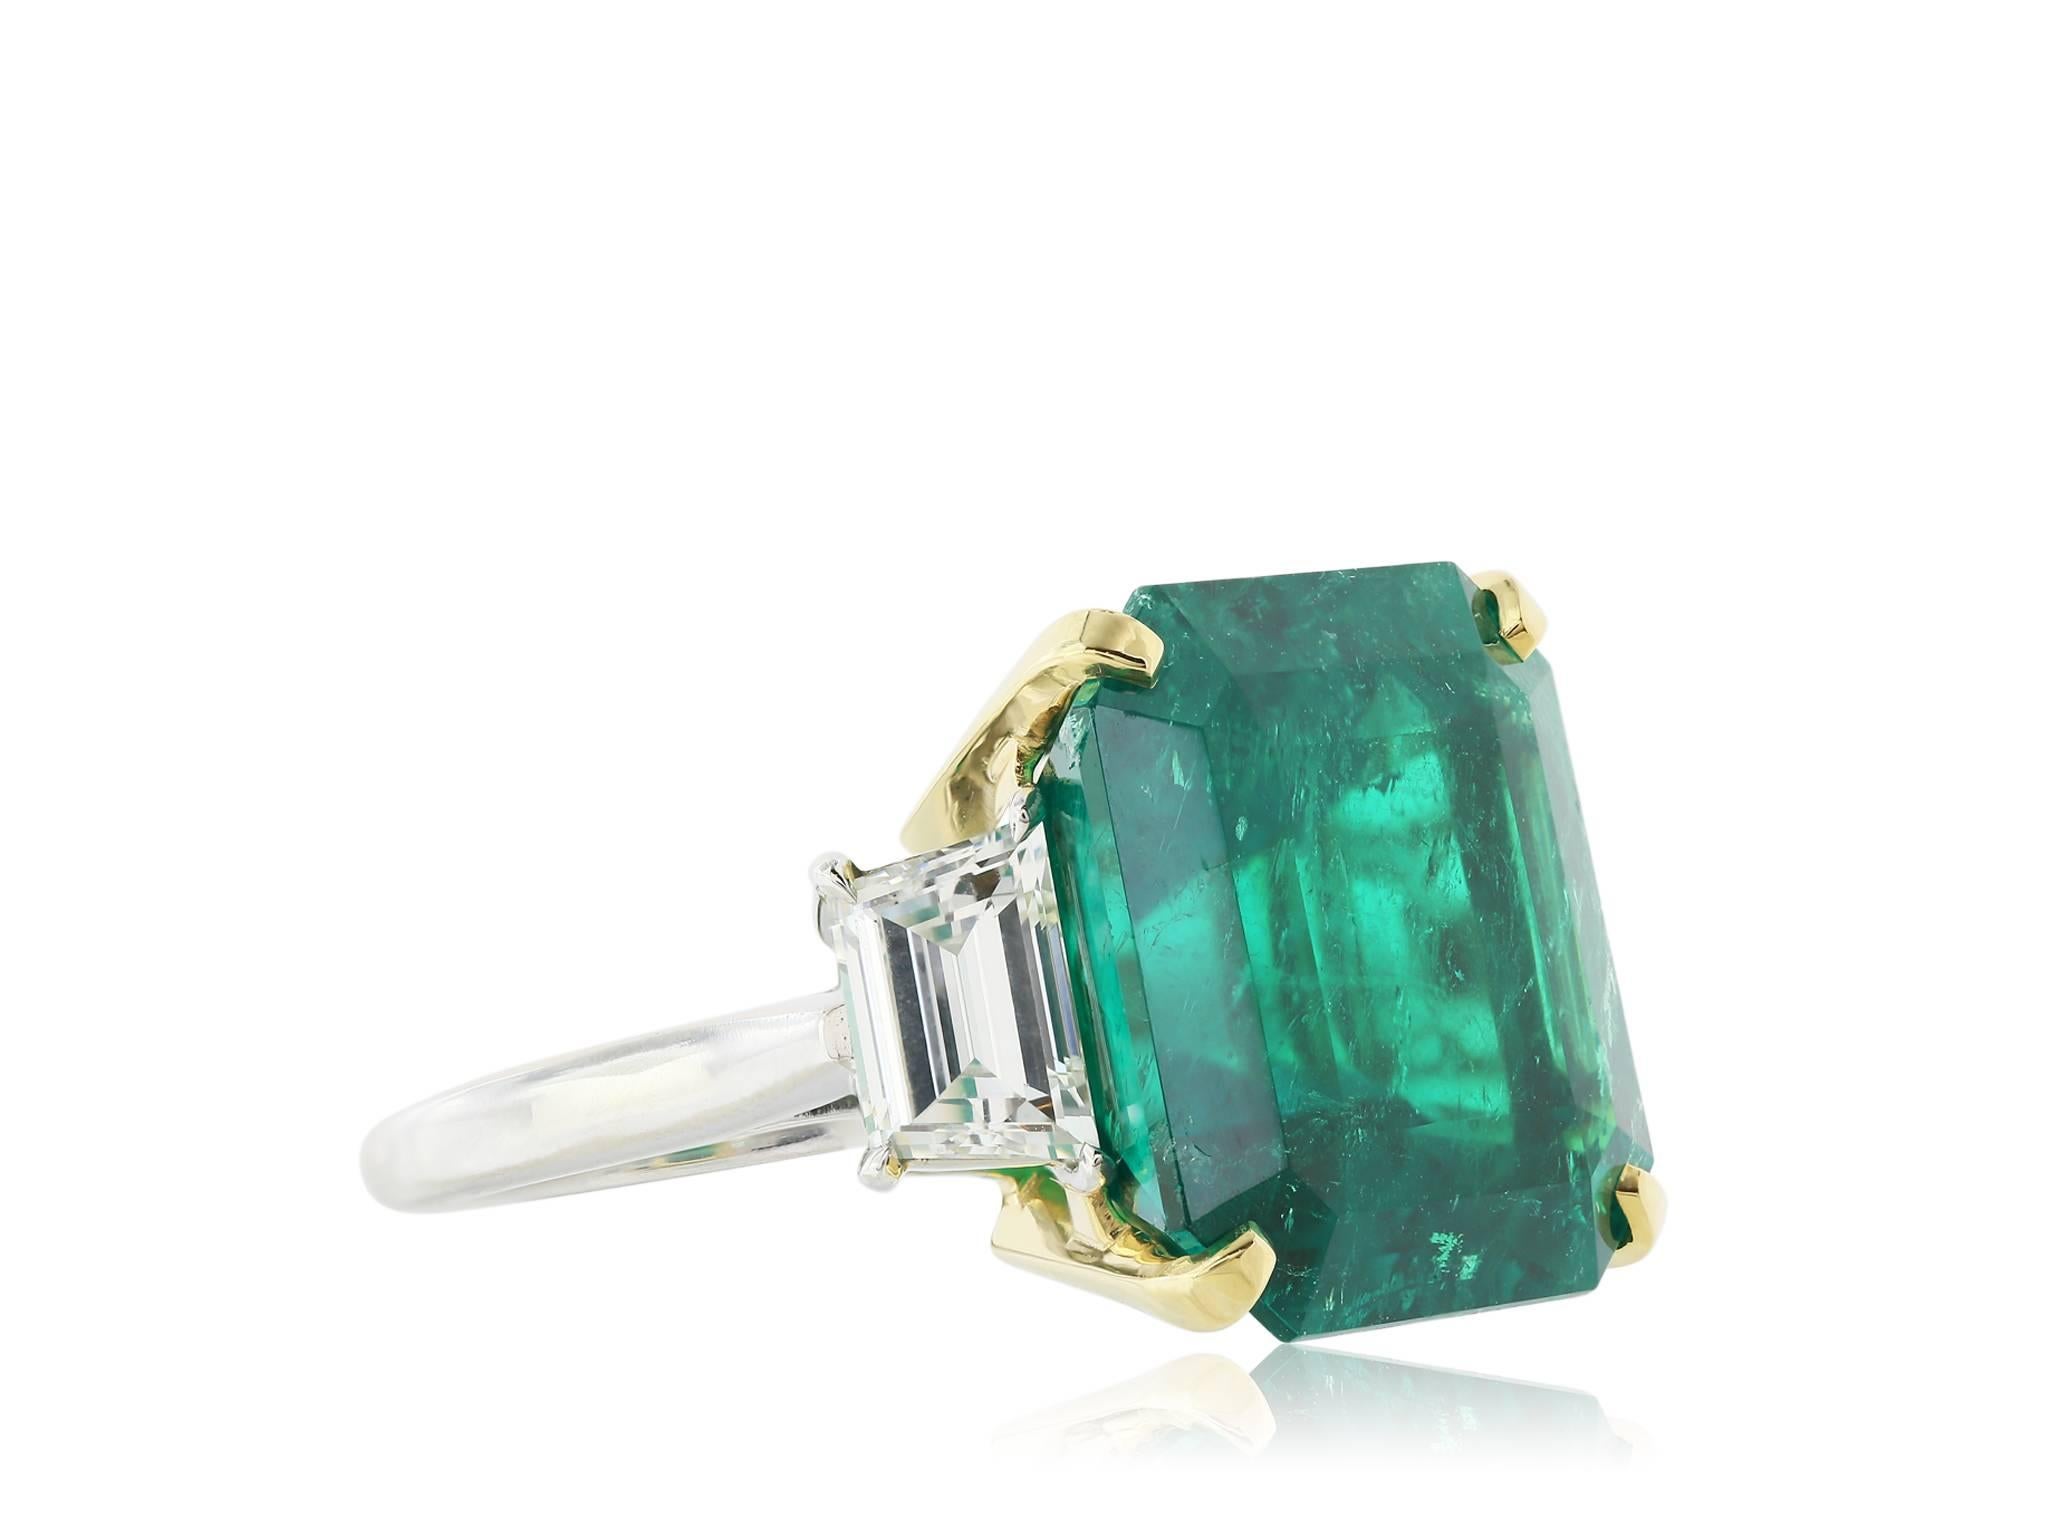 Shreve, Crump & Low''s custom made 18 karat yellow gold and platinum custom made Fine Colombian Emerald and diamond three stone engagement ring. Consisting of one square cut Emerald weighing 16.11 carats AGL #1084849 Colombian Minor oil and diamond